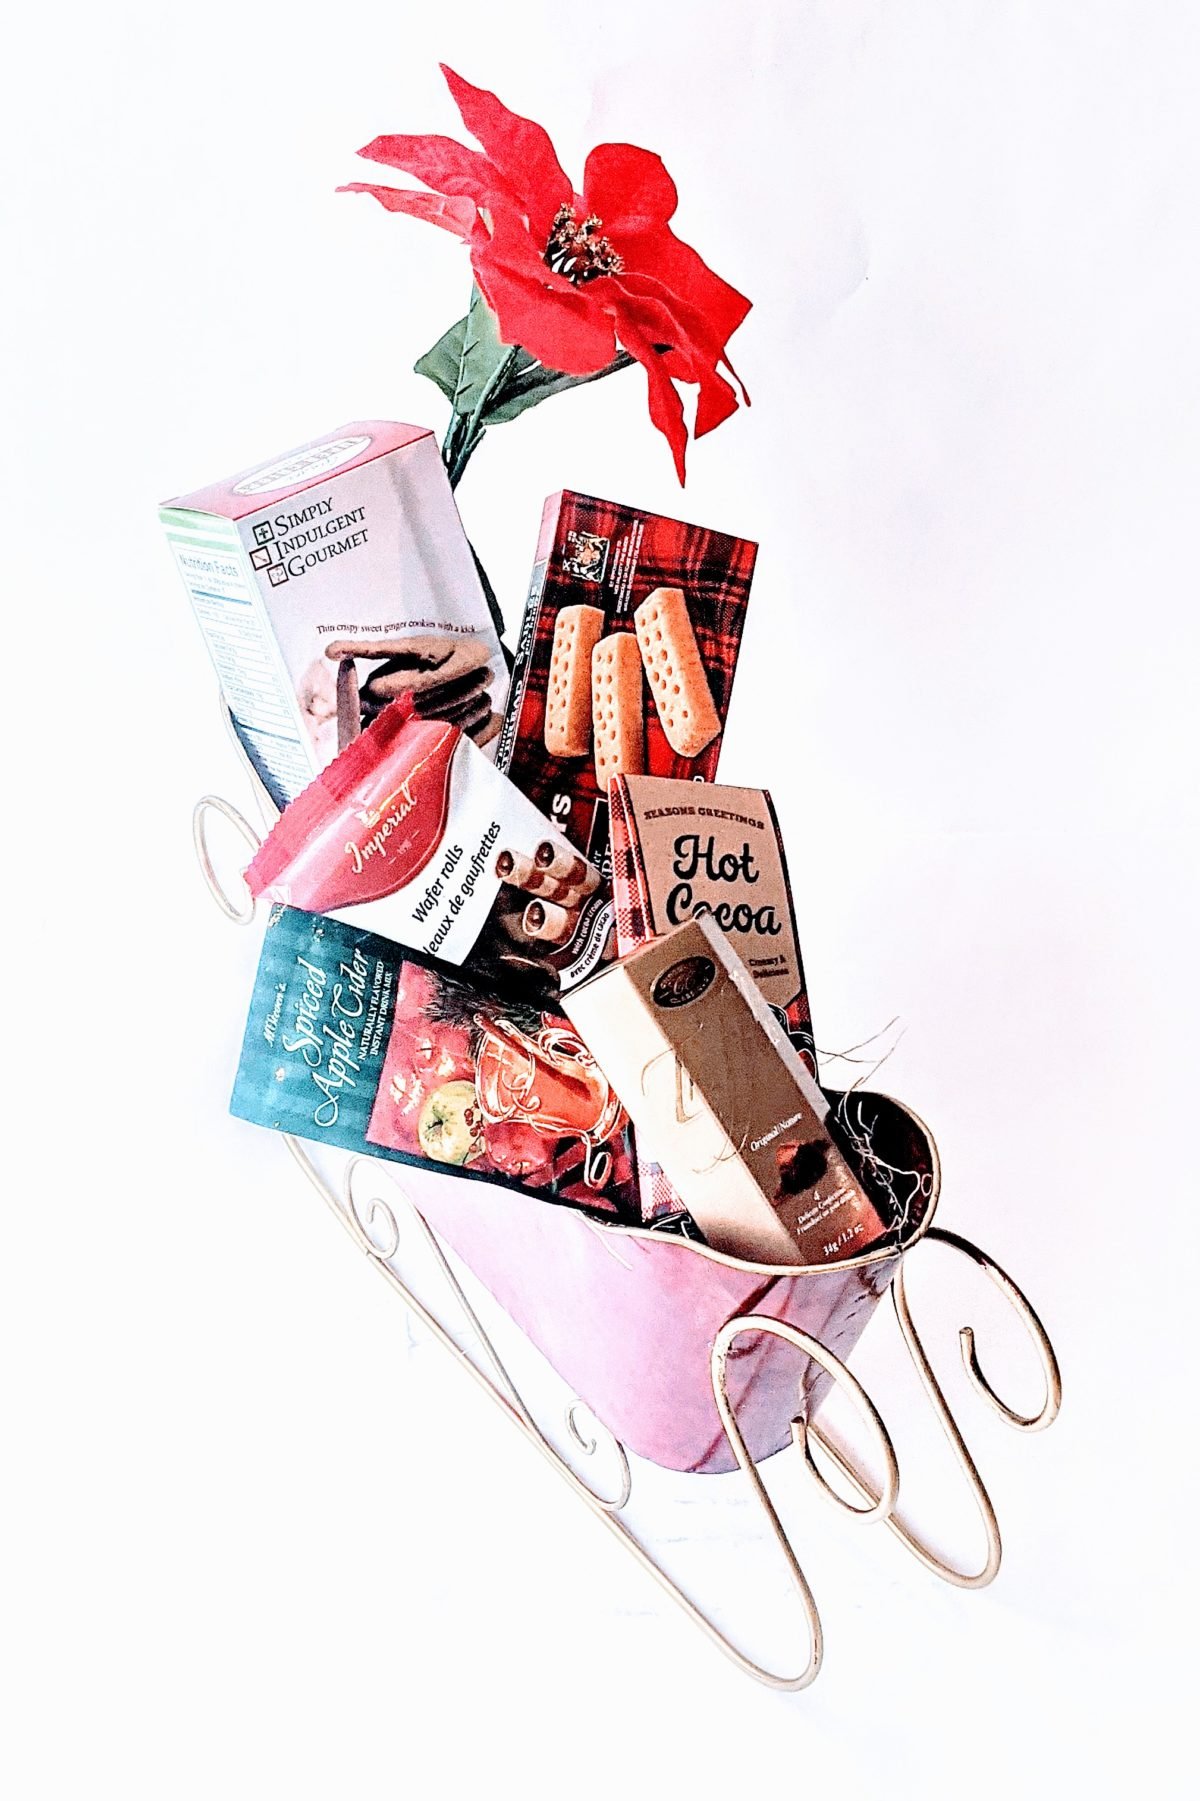 holiday gifts and gift baskets for friends, family and colleagues.